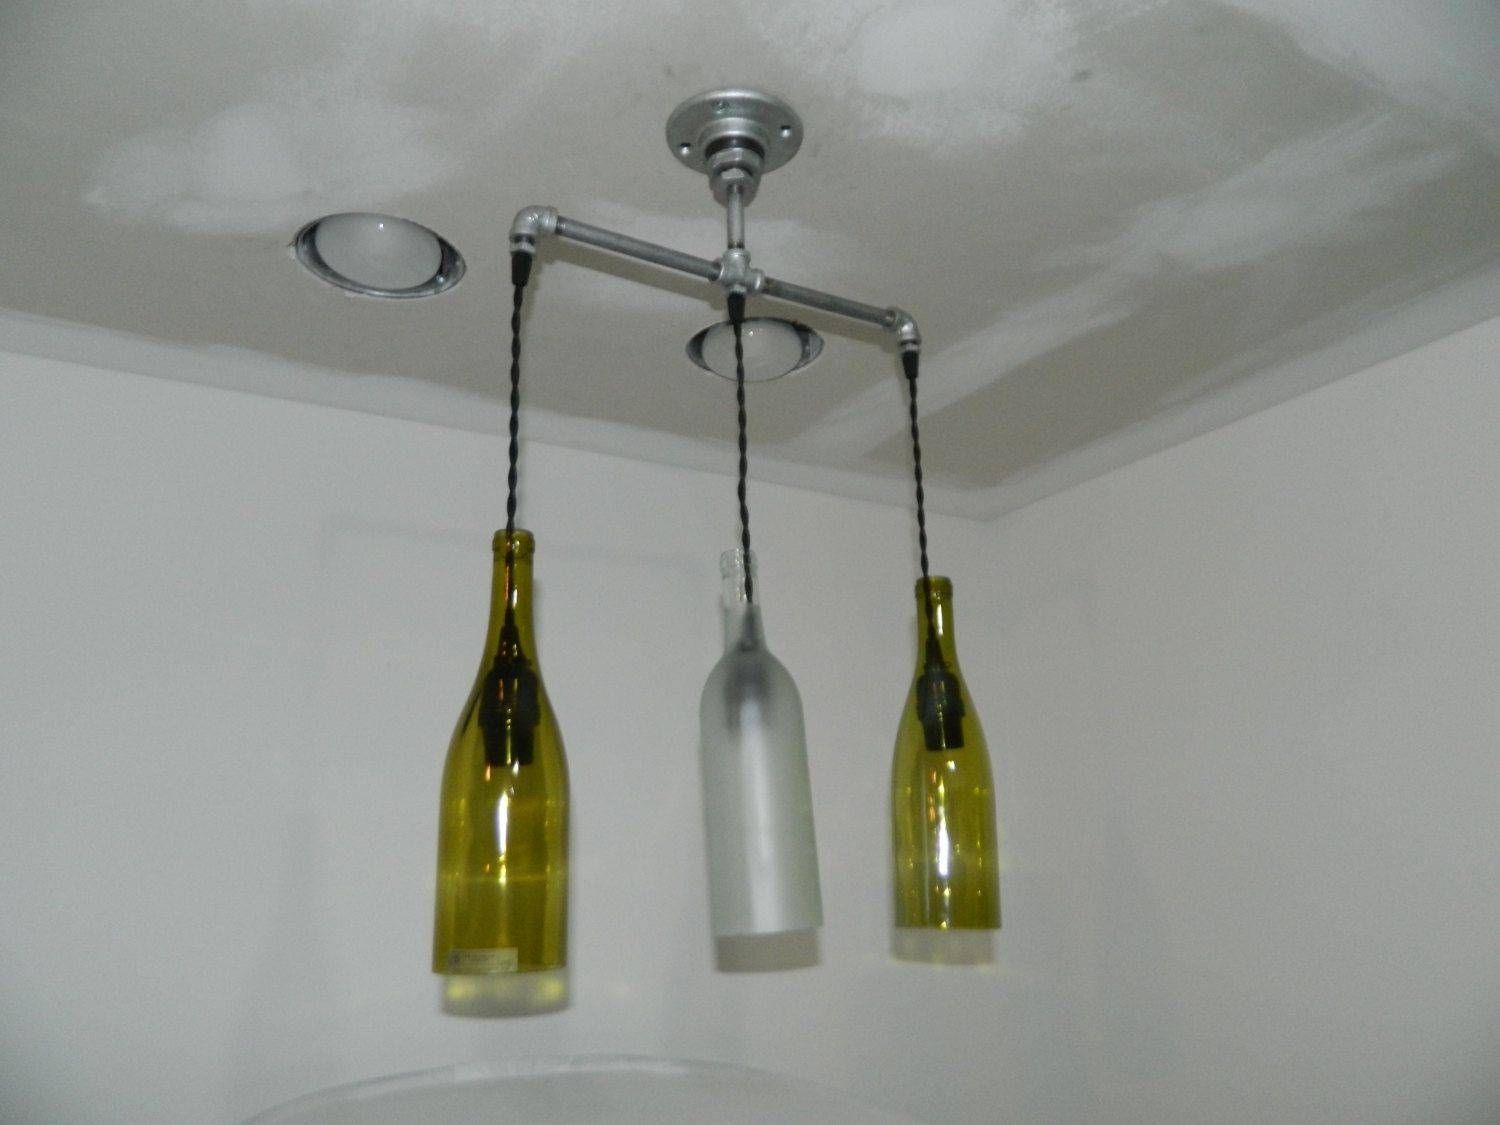 Epic Wine Bottle Pendant Light 16 About Remodel Plug In Pendant Within Epic Lamps Pendant Lights (View 13 of 15)